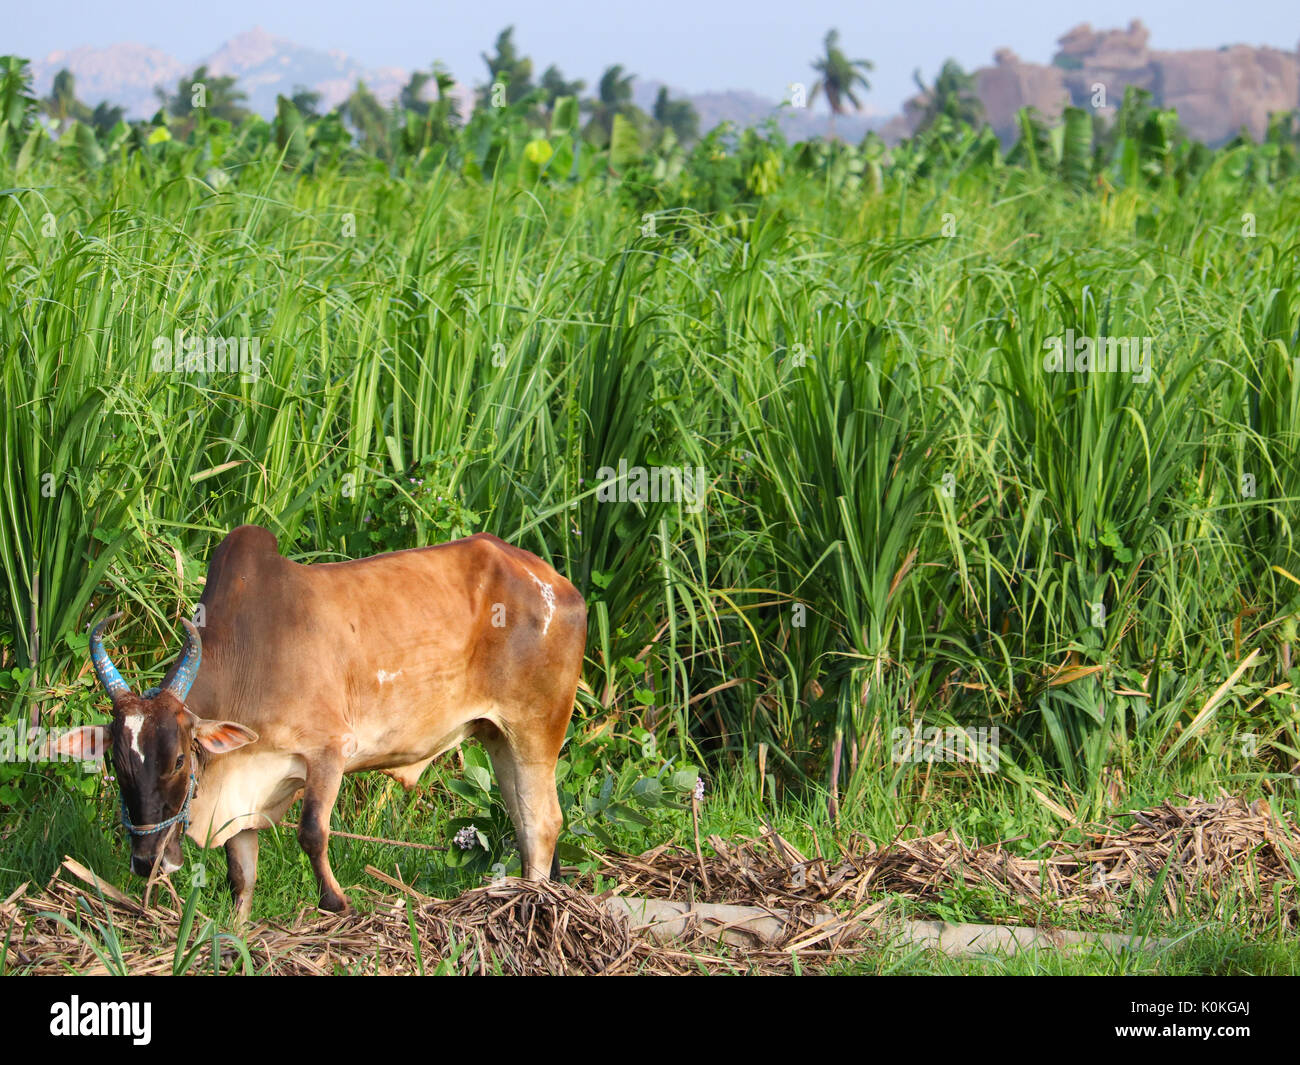 Ox animal in a sugarcane field with beautiful countryside farm land and blue sky Stock Photo